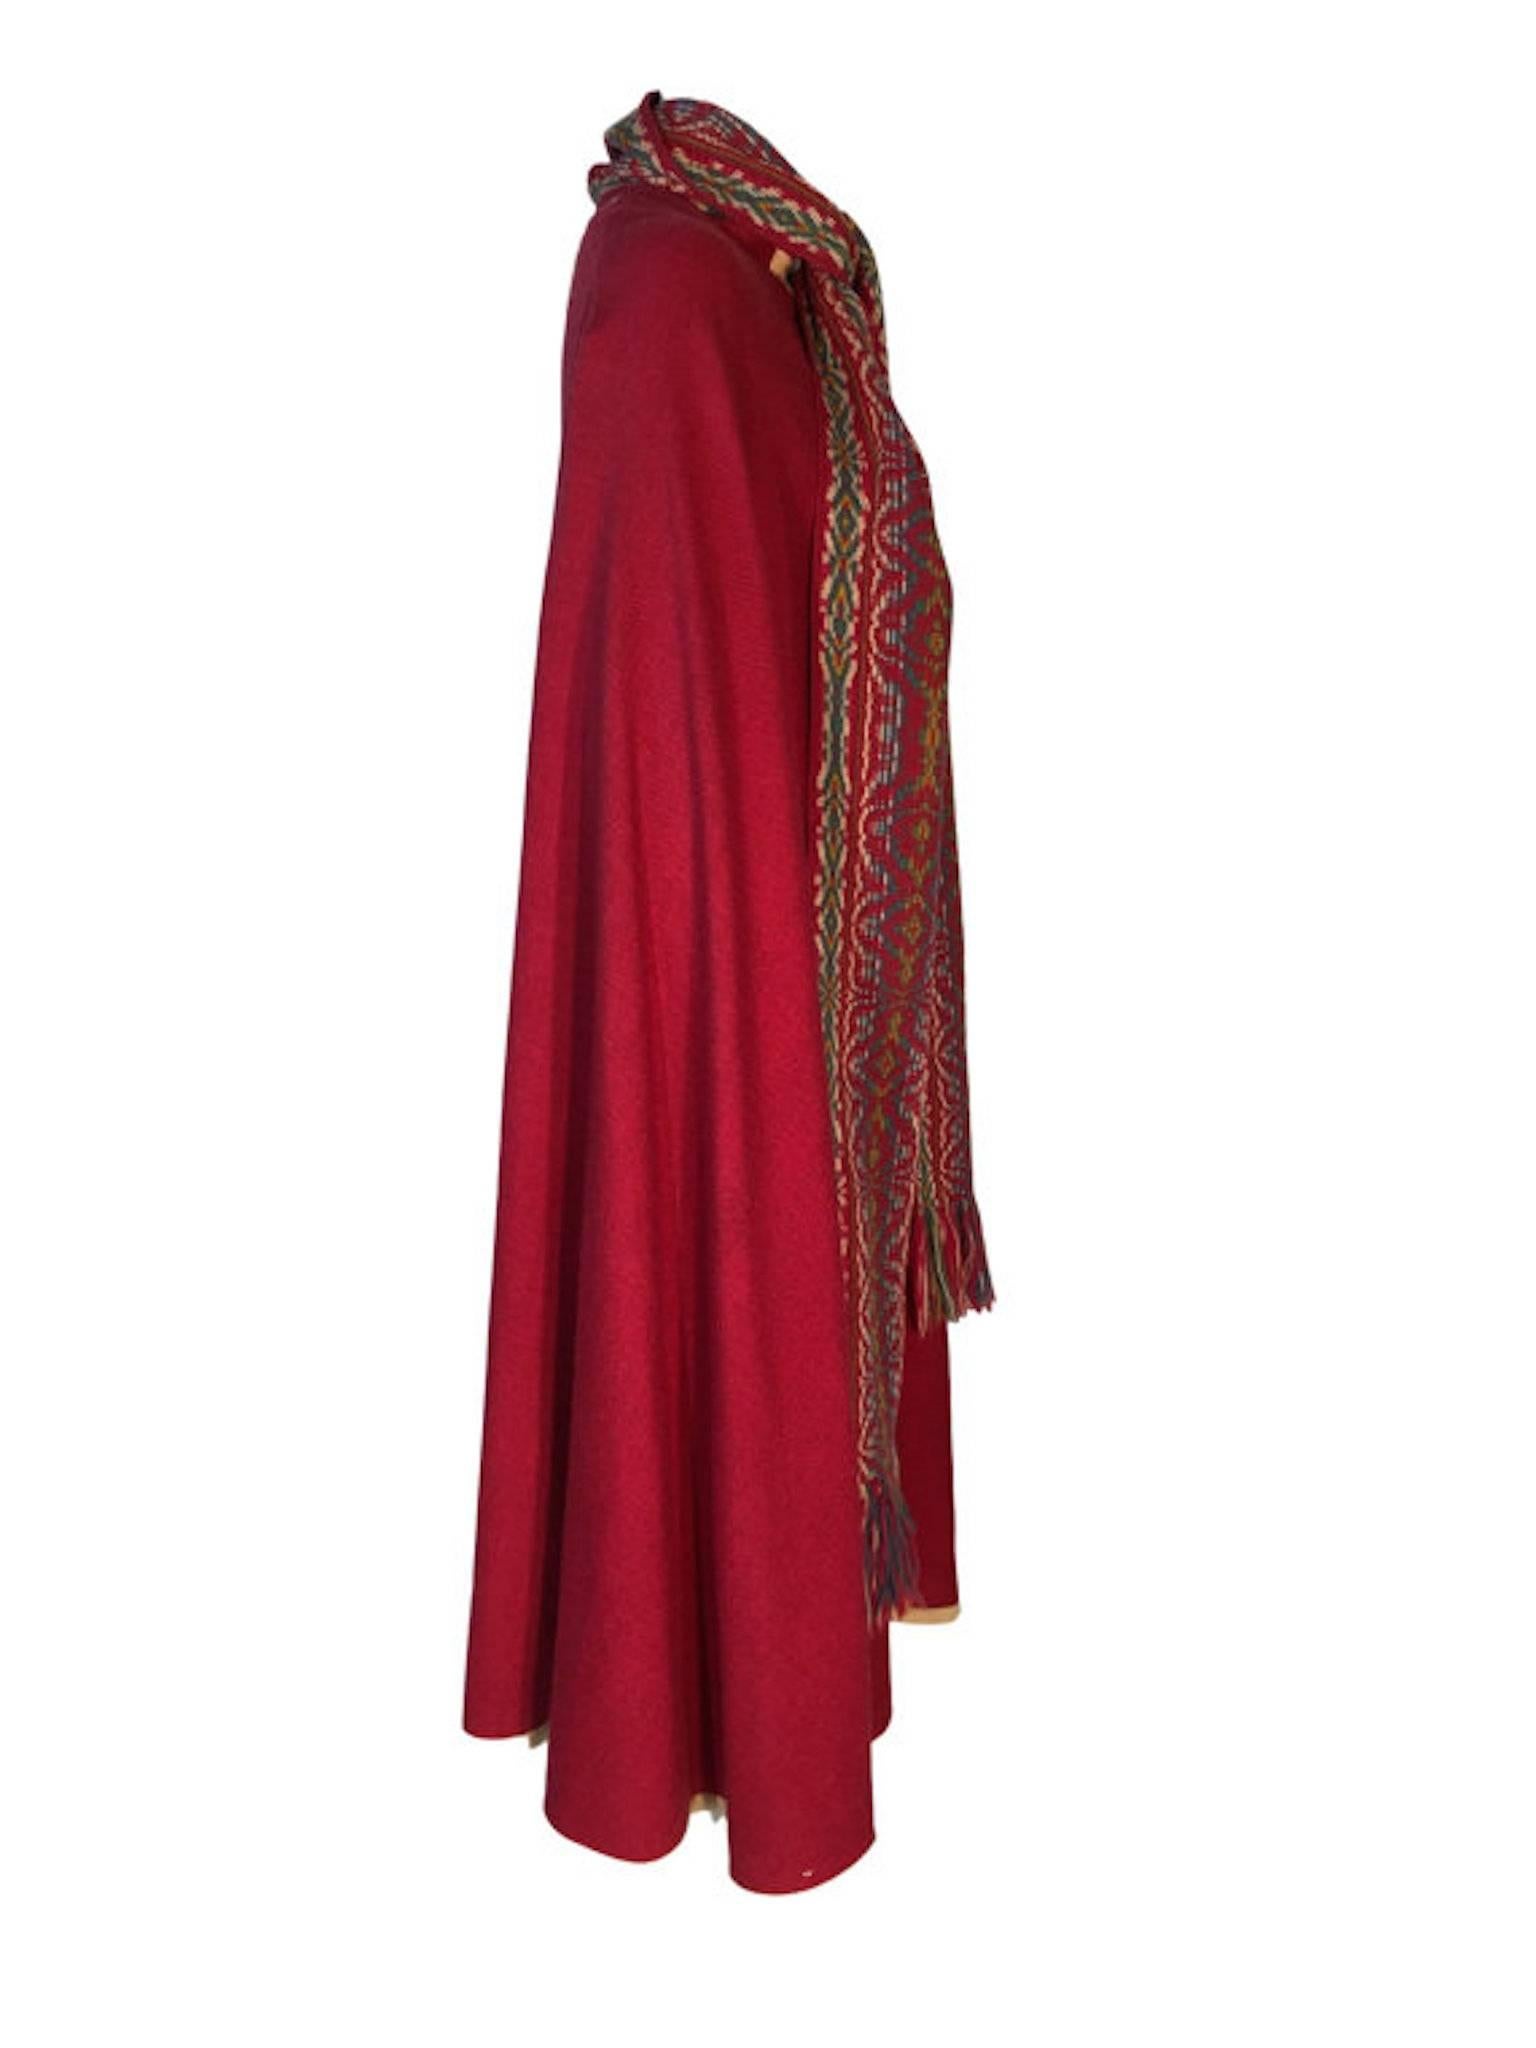 Original 1970s 100% wool woven cape, made from 100% wool and has woven patterned detail on back, buttons and neck scarf. Labelled "The Spinning Wheel in Stratford Upon Haven"

Size 8/10 measures 16 inches across shoulders and 48 inches